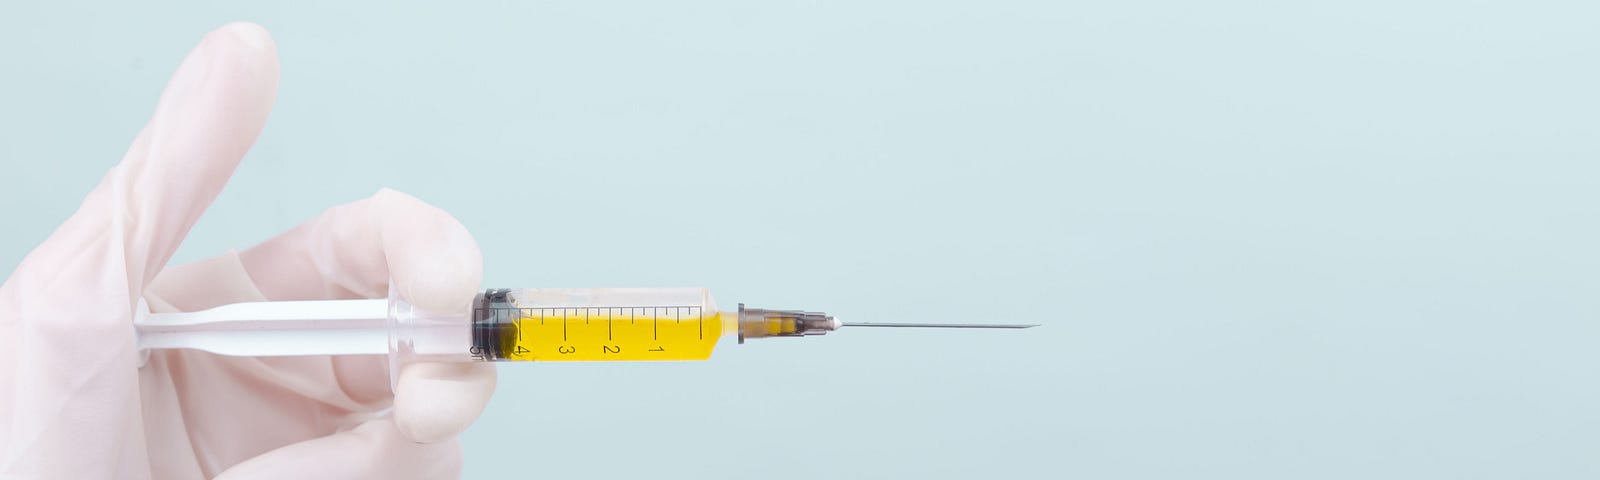 Photo of a gloved hand (at left of image) holding a syringe and needle. The syringe has yellow fluid and the hand is about to push on the plunger. Light blue background.